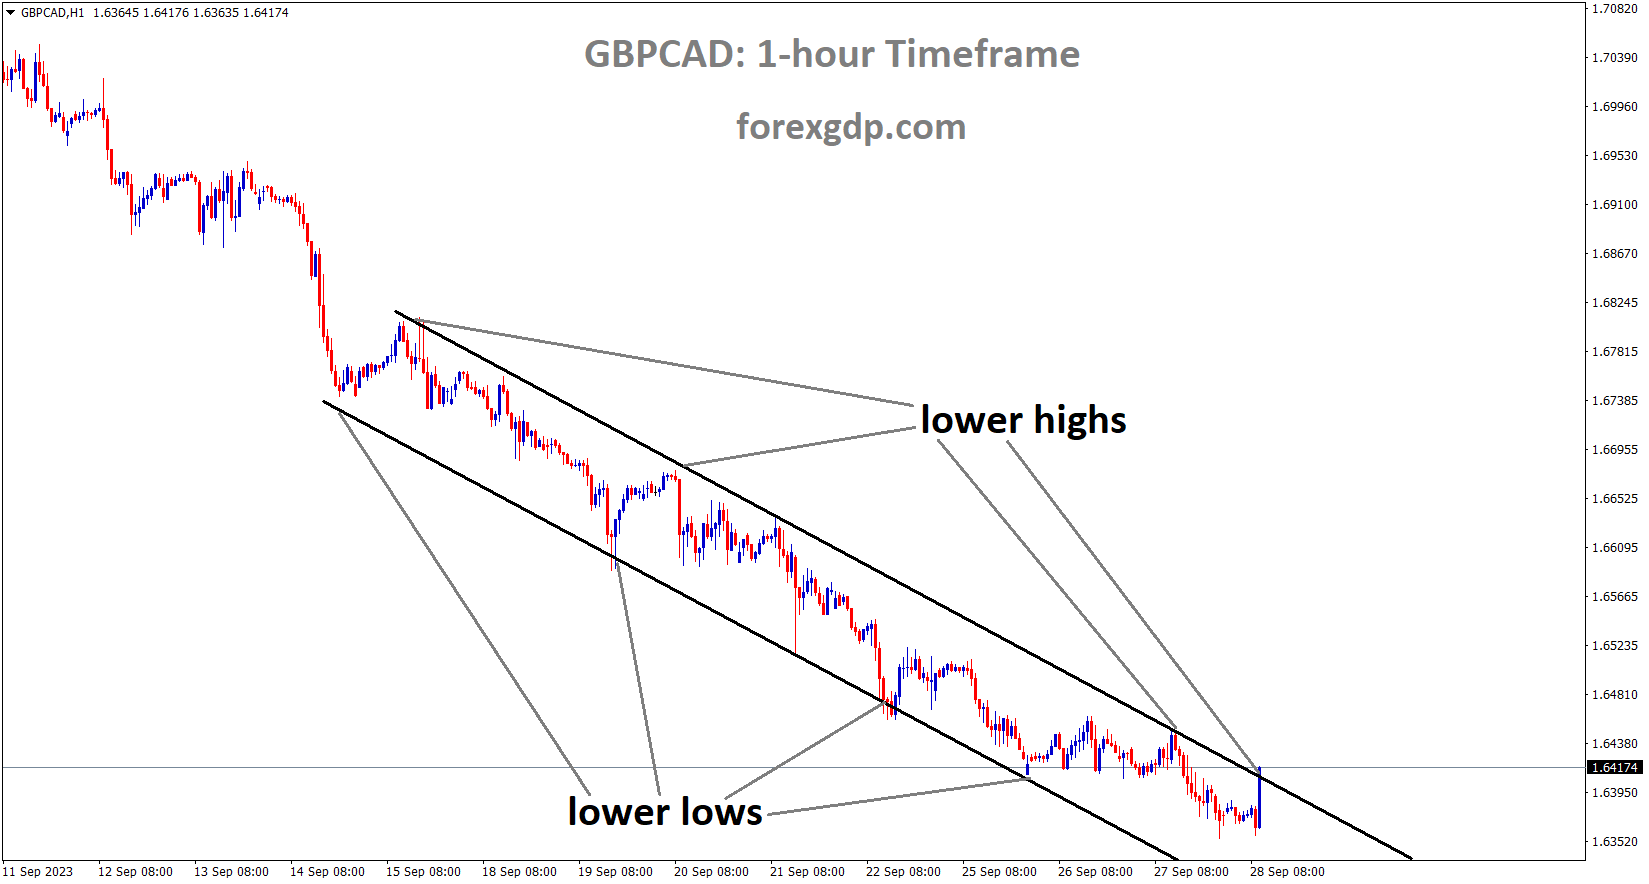 GBPCAD is moving in the Descending channel and the market has reached the lower high area of the channel